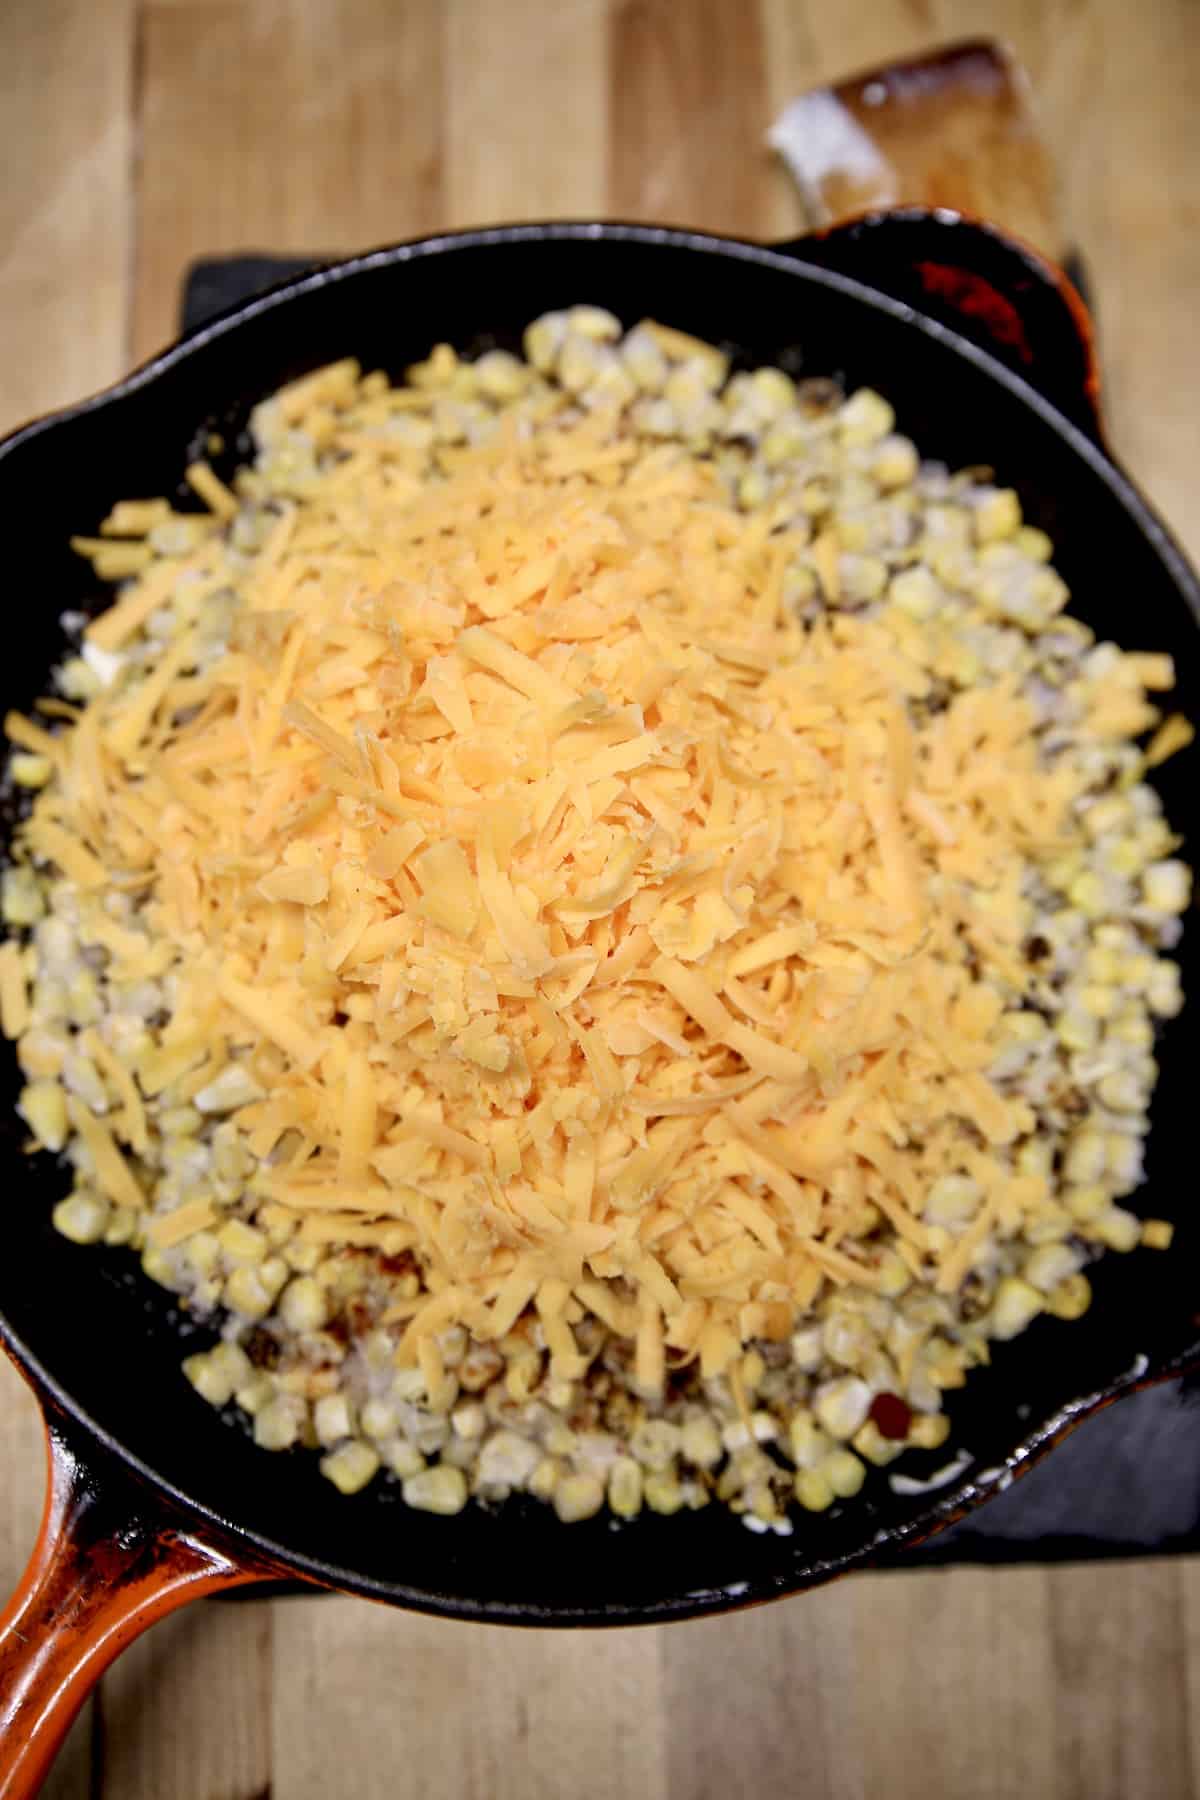 Skillet corn recipe with cheddar cheese.